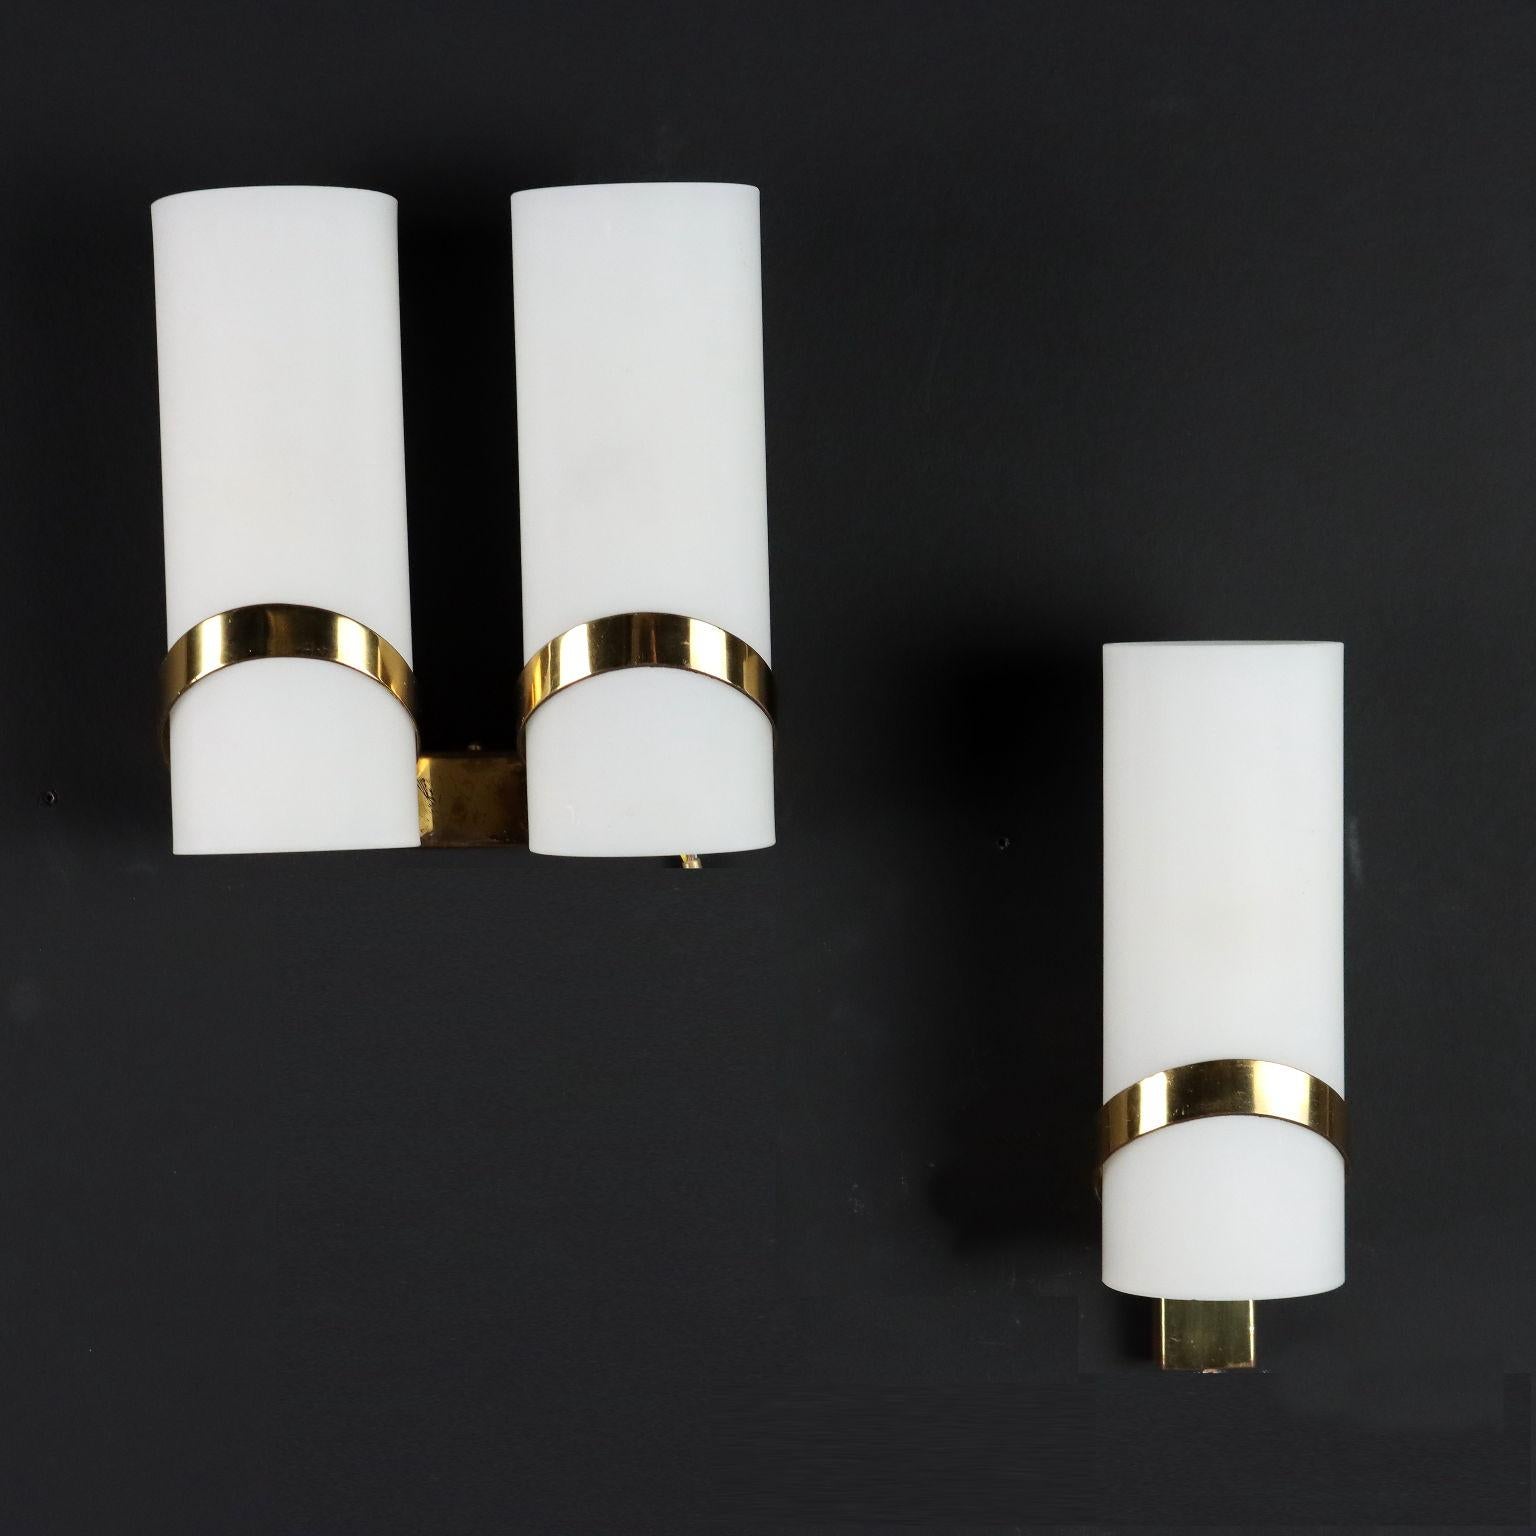 Pair of wall lamps, one of which is single and the other one is double. Brass and opaline glass.